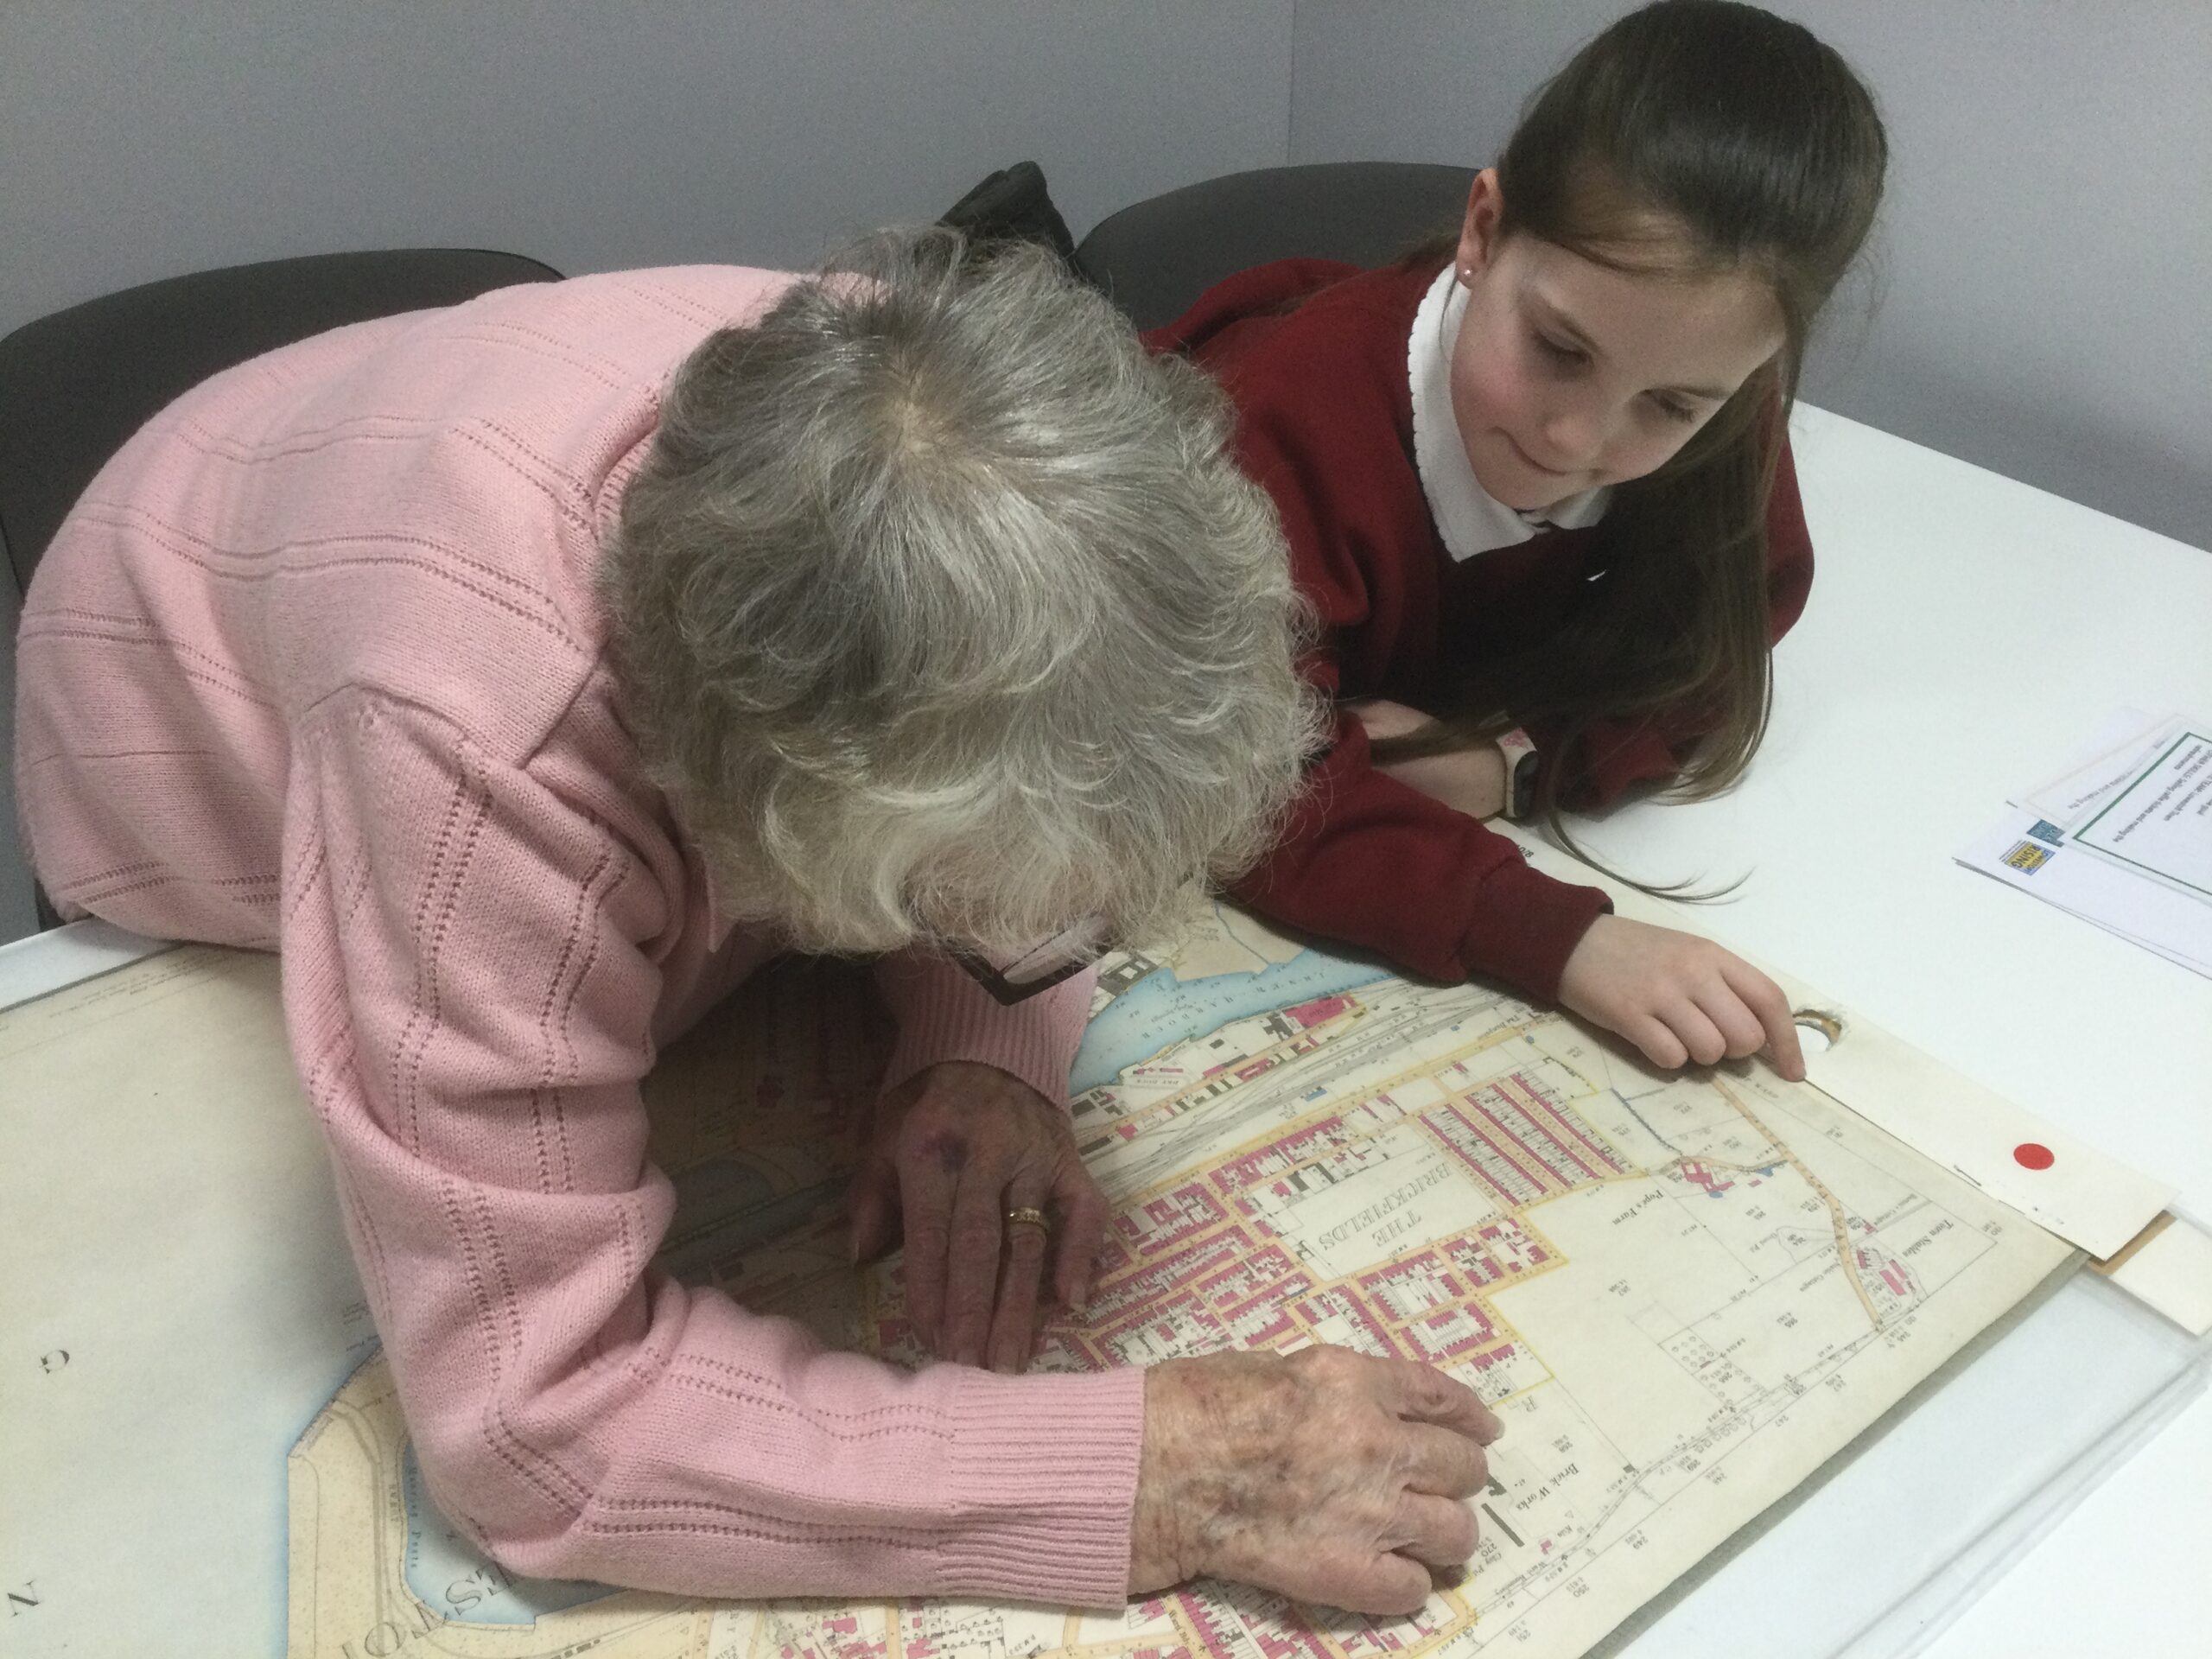 A woman in a pink jumper leans over a map looking closely at an area and pointing something out to the school girl beside her